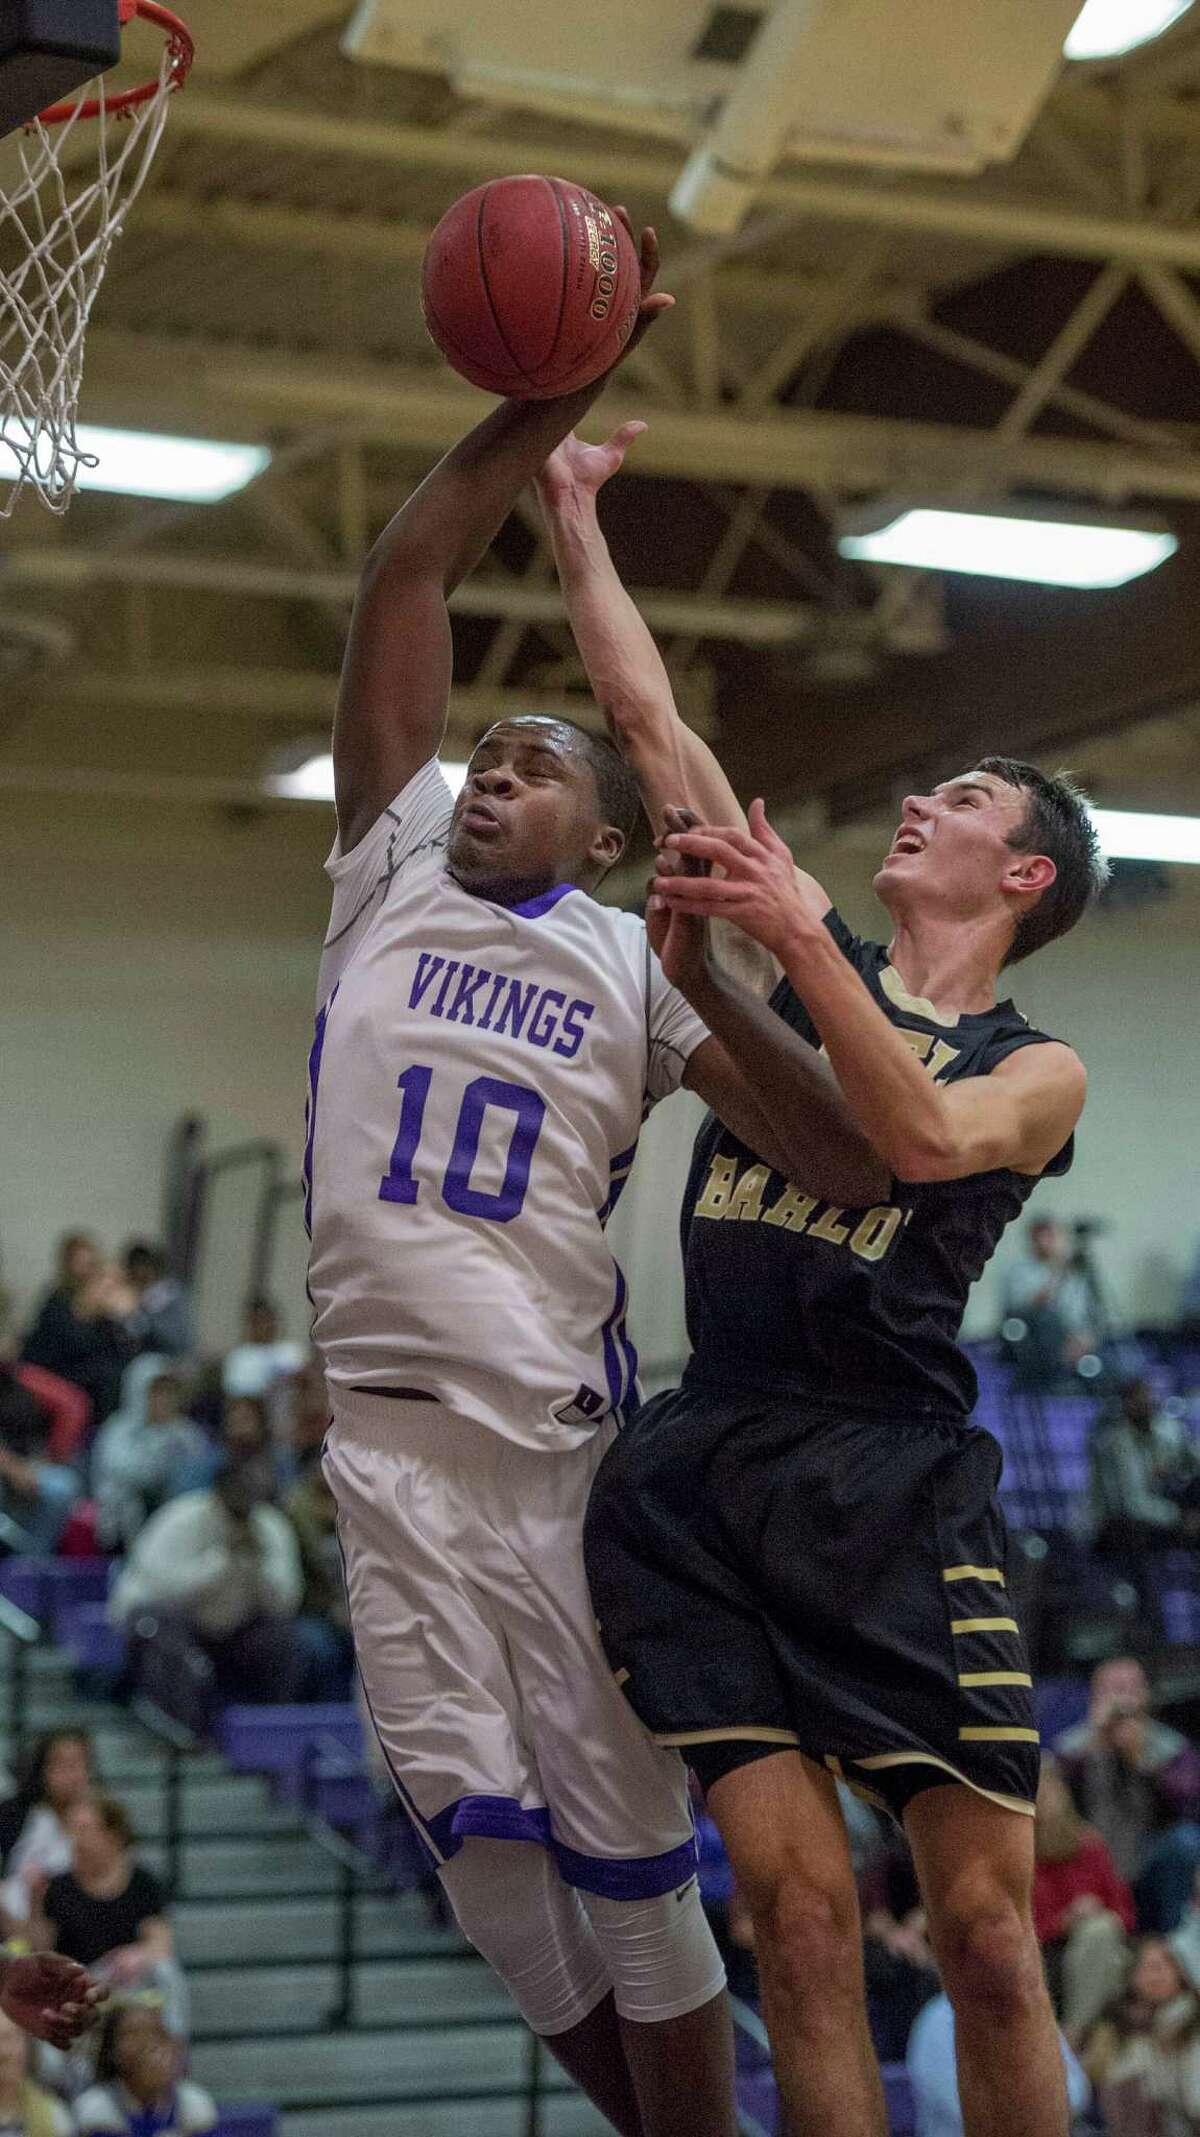 Westhill’s Tyrell Alexander and Joel Barlow’s Ryan Corr battle for a rebound during a boys basketball game played at Westhill High School in Stamford on Monday night.